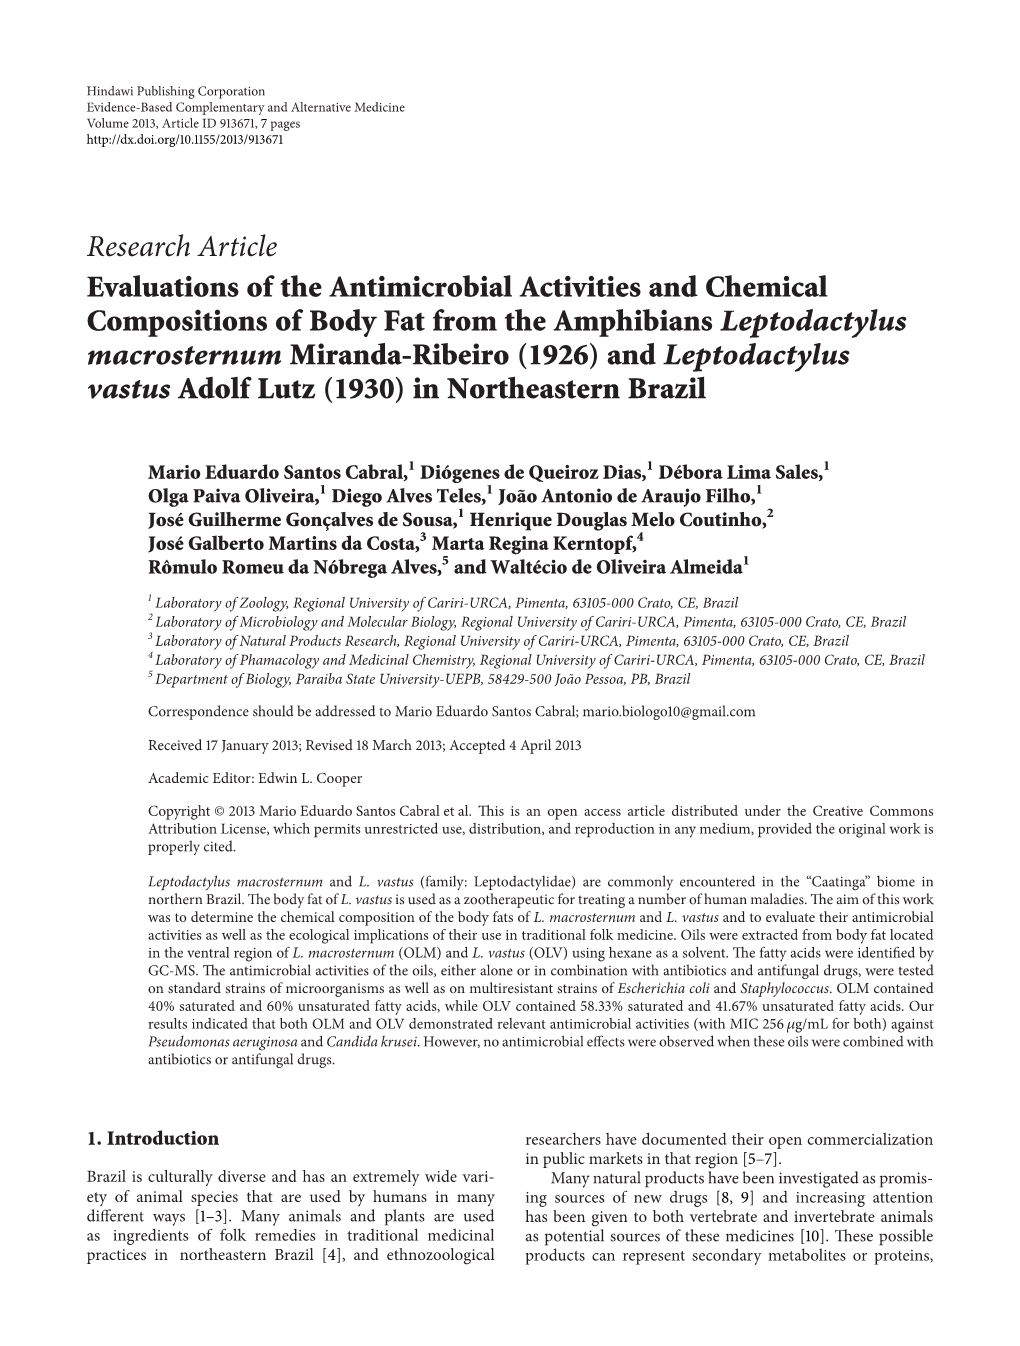 Evaluations of the Antimicrobial Activities and Chemical